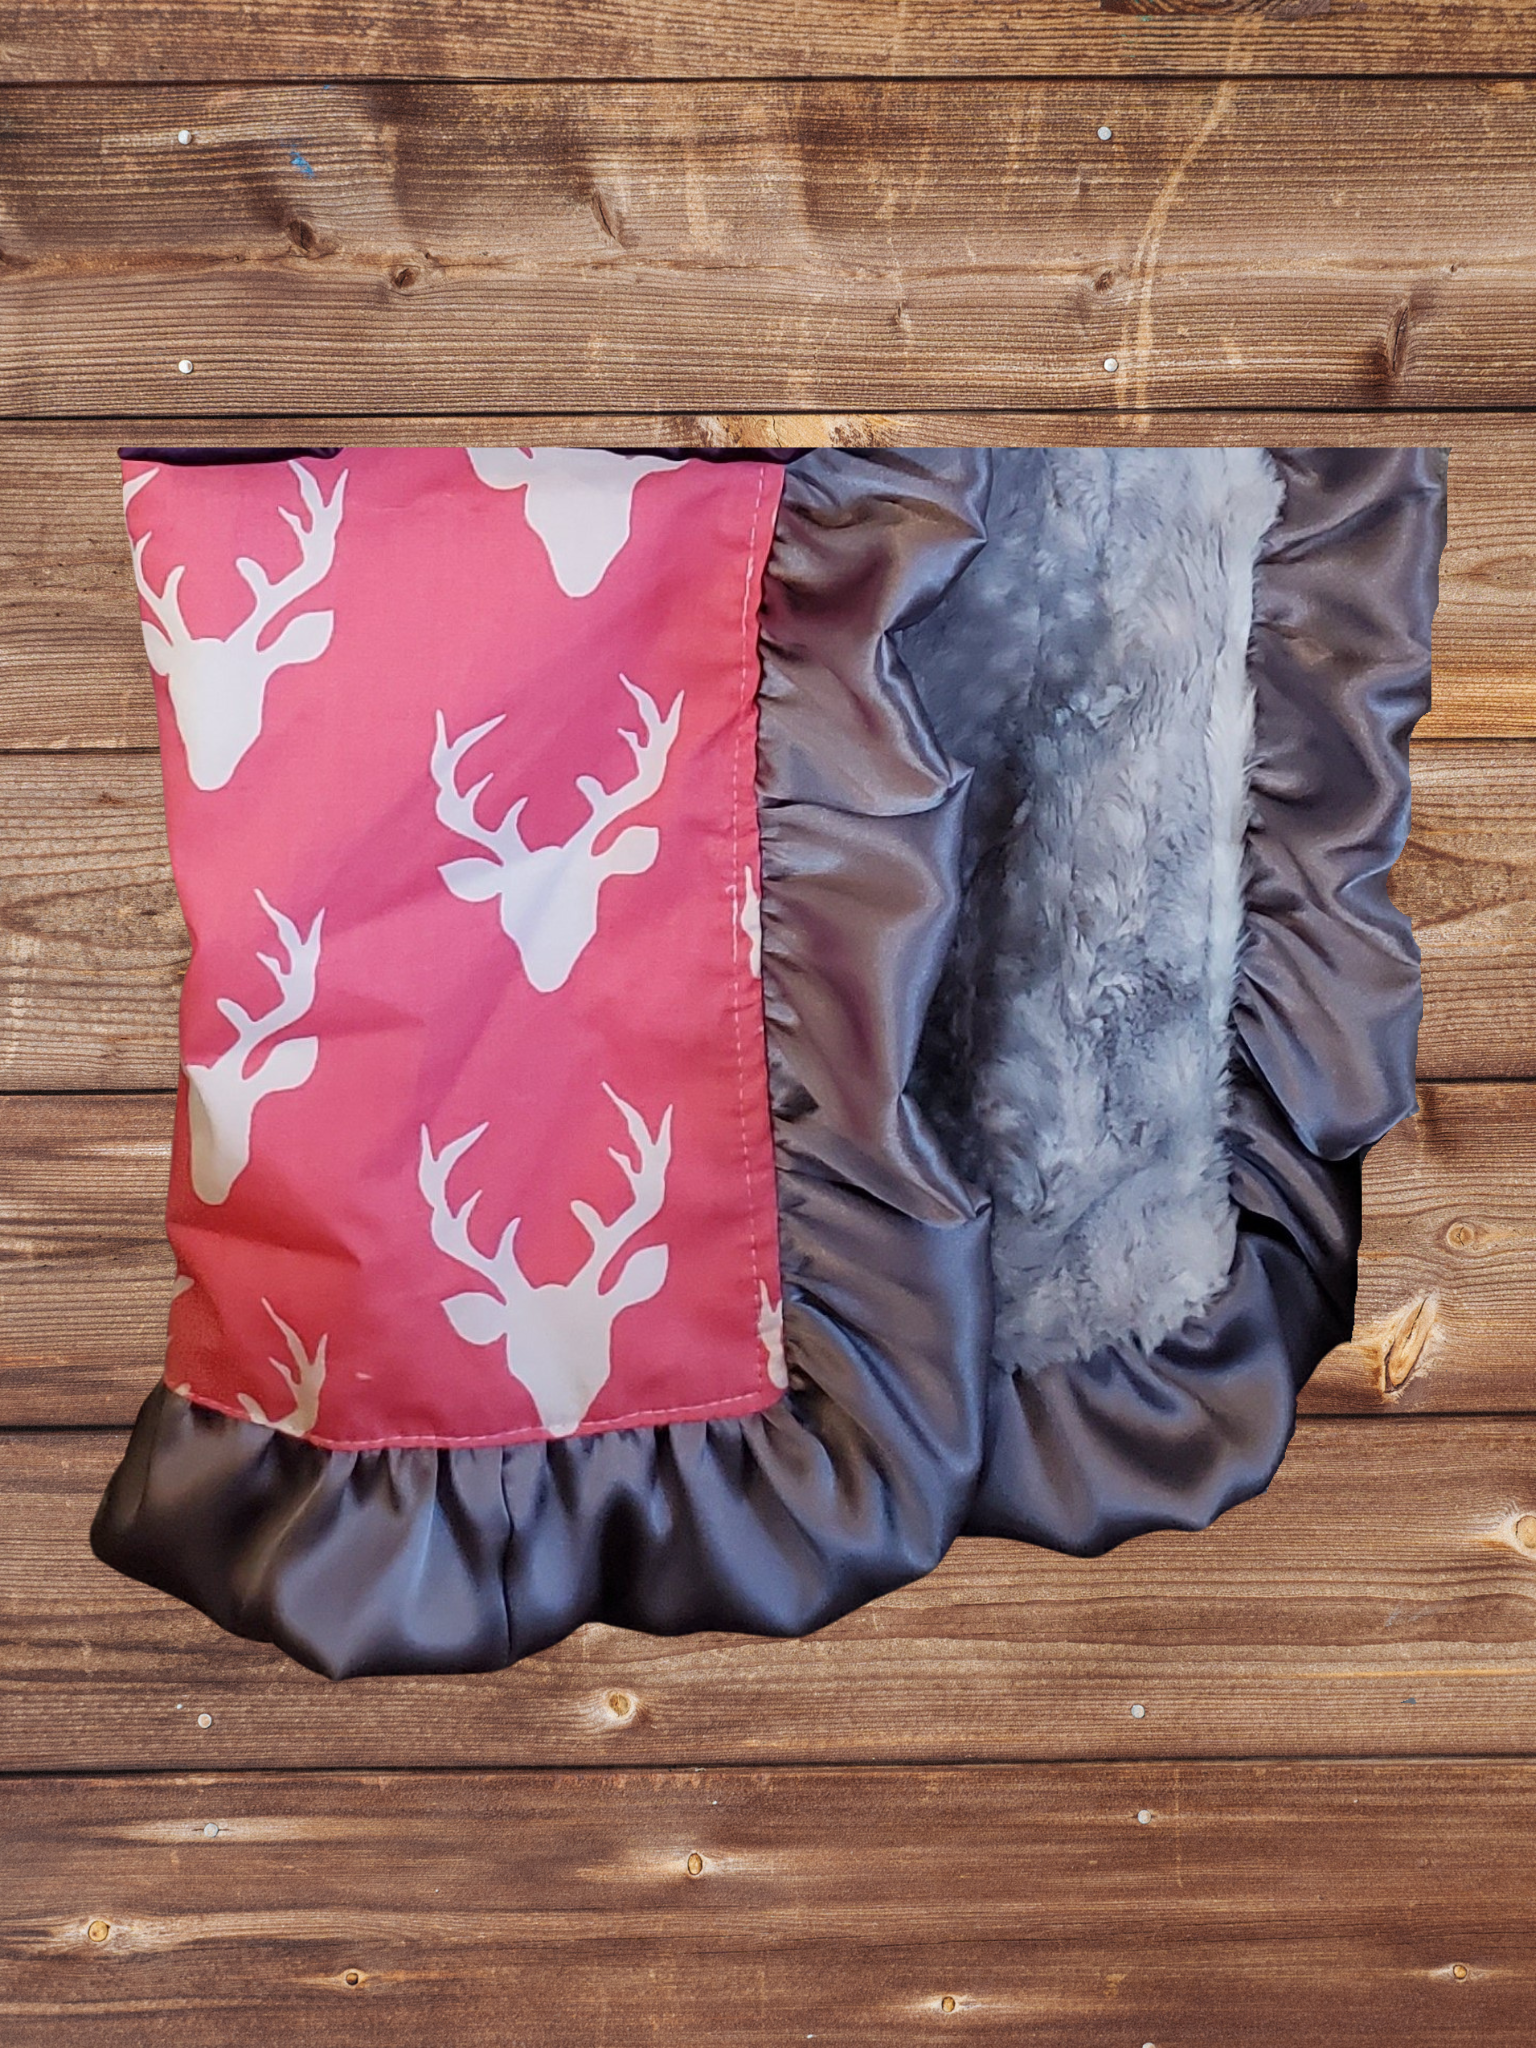 Ruffle Baby Lovey - Pink Buck and Silver Fawn Minky Woodland Lovey - DBC Baby Bedding Co 